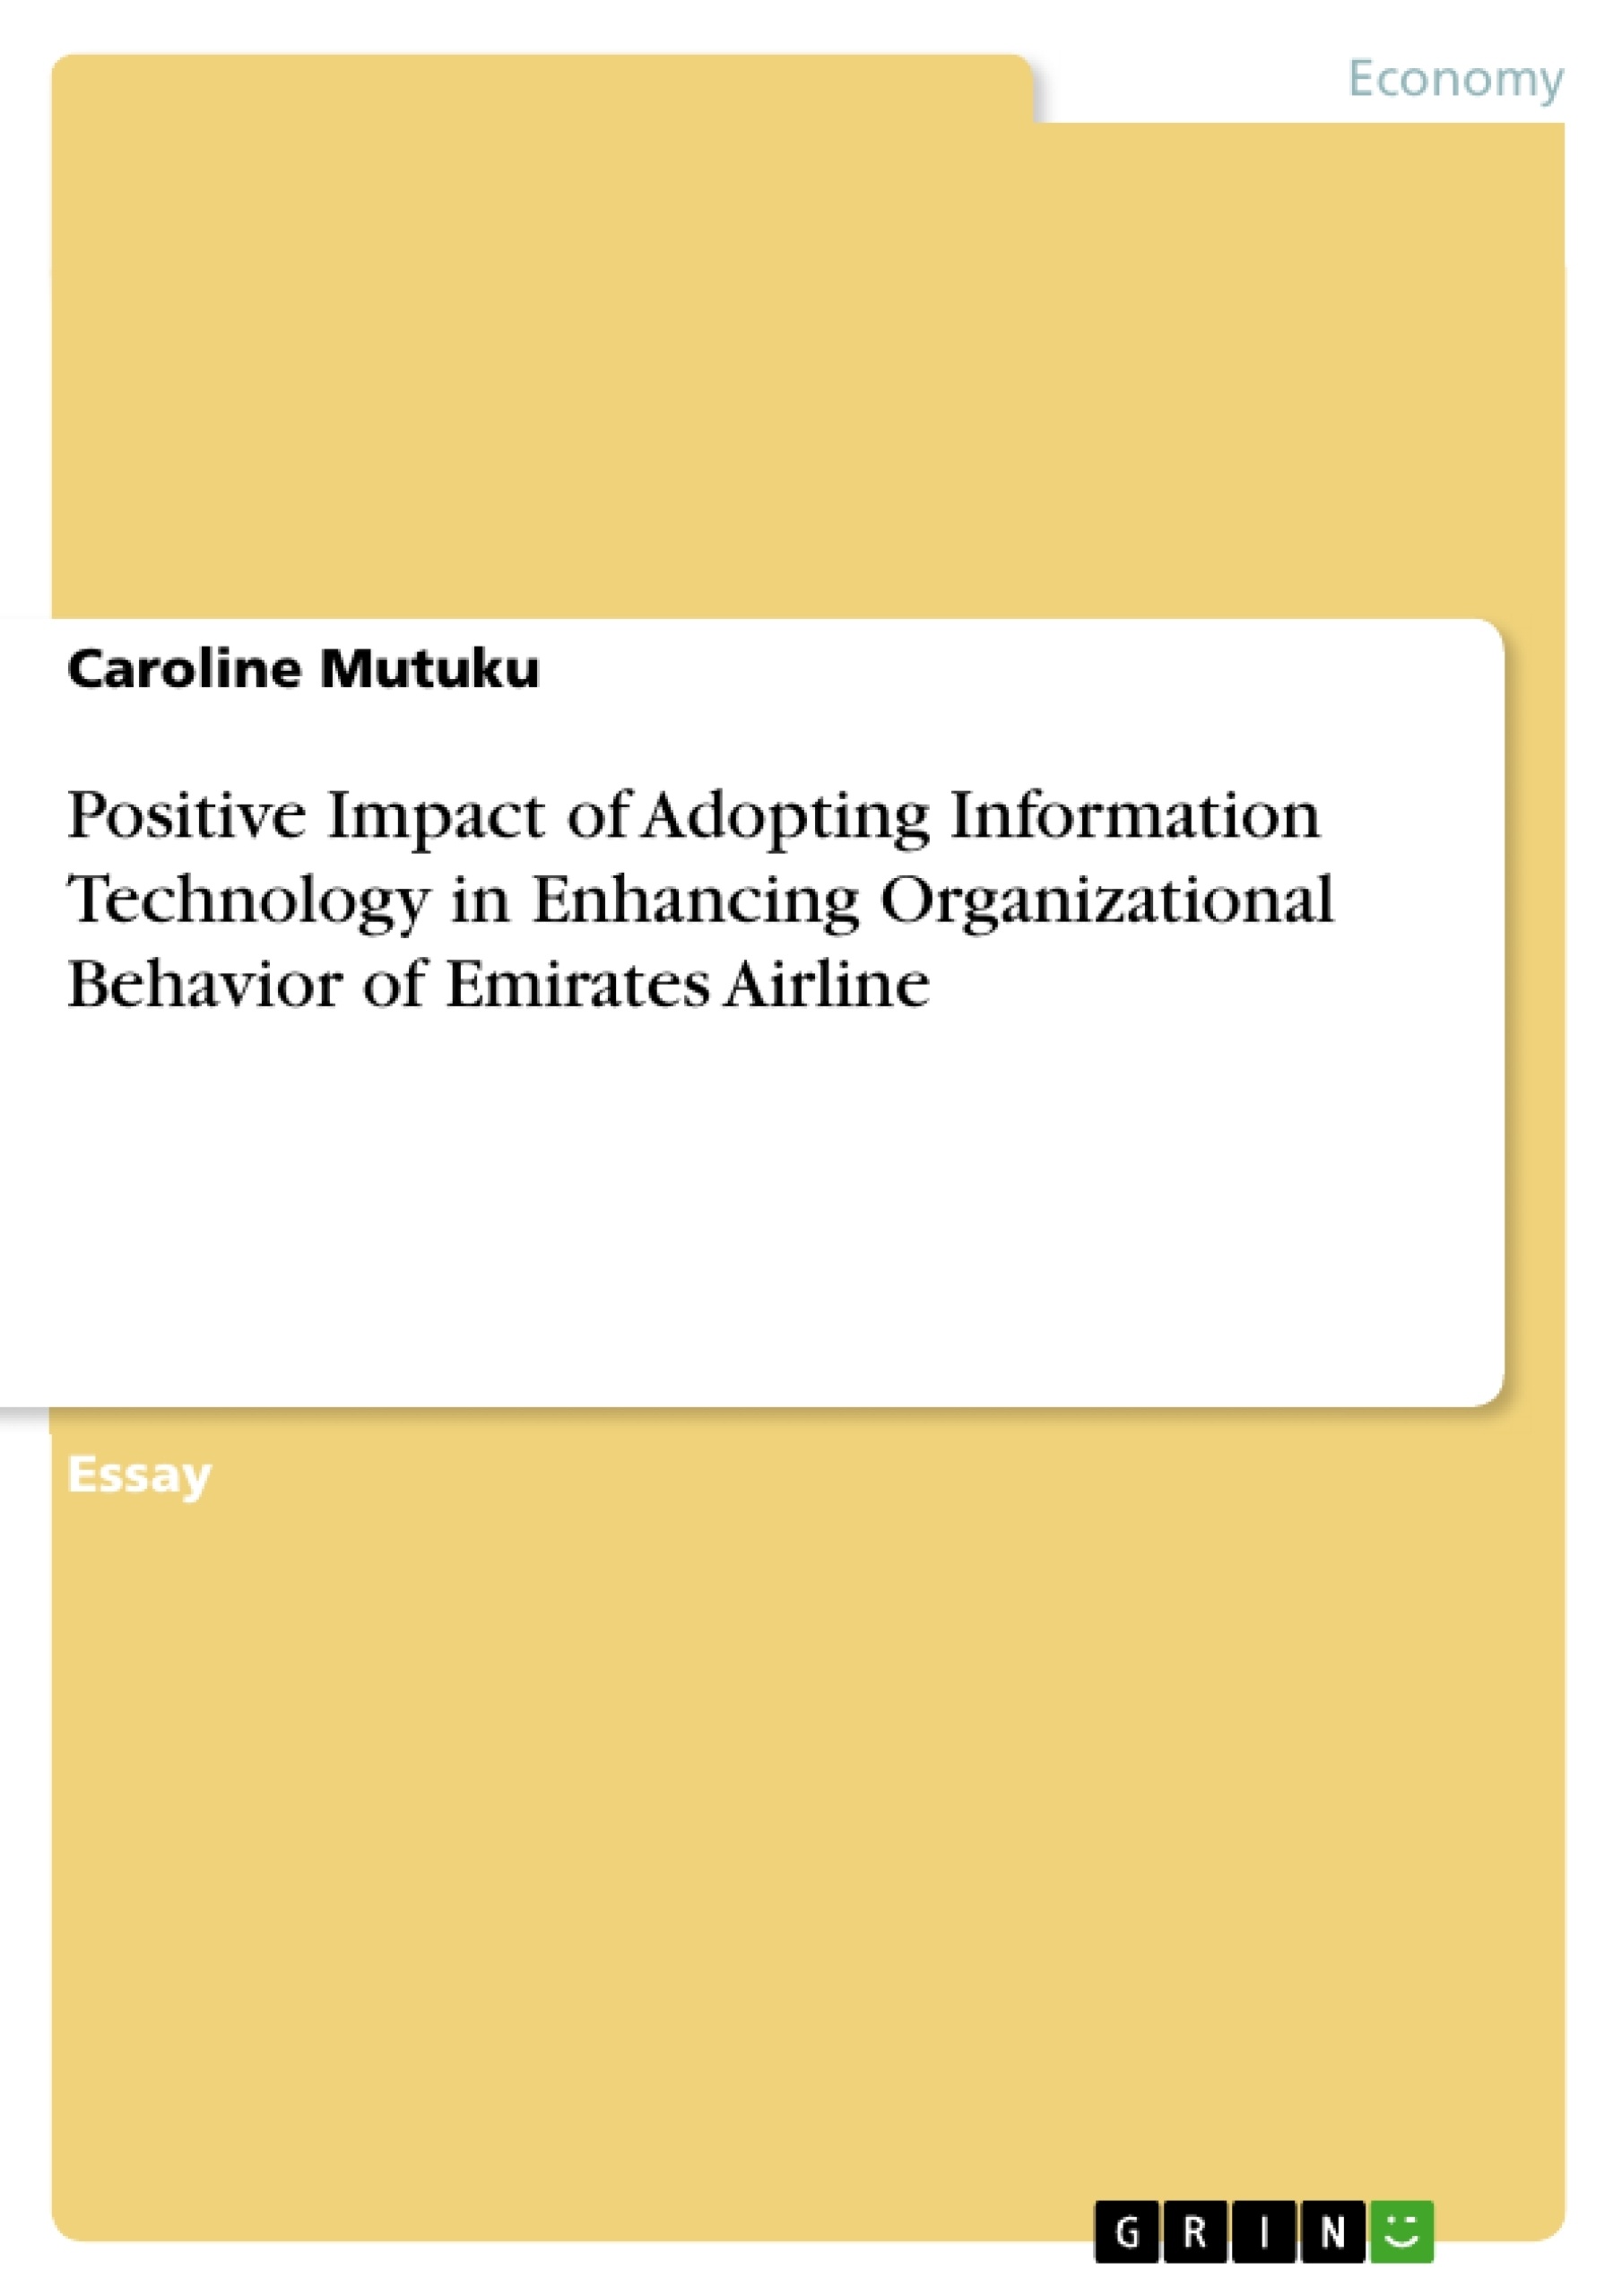 Title: Positive Impact of Adopting Information Technology in Enhancing Organizational Behavior of Emirates Airline